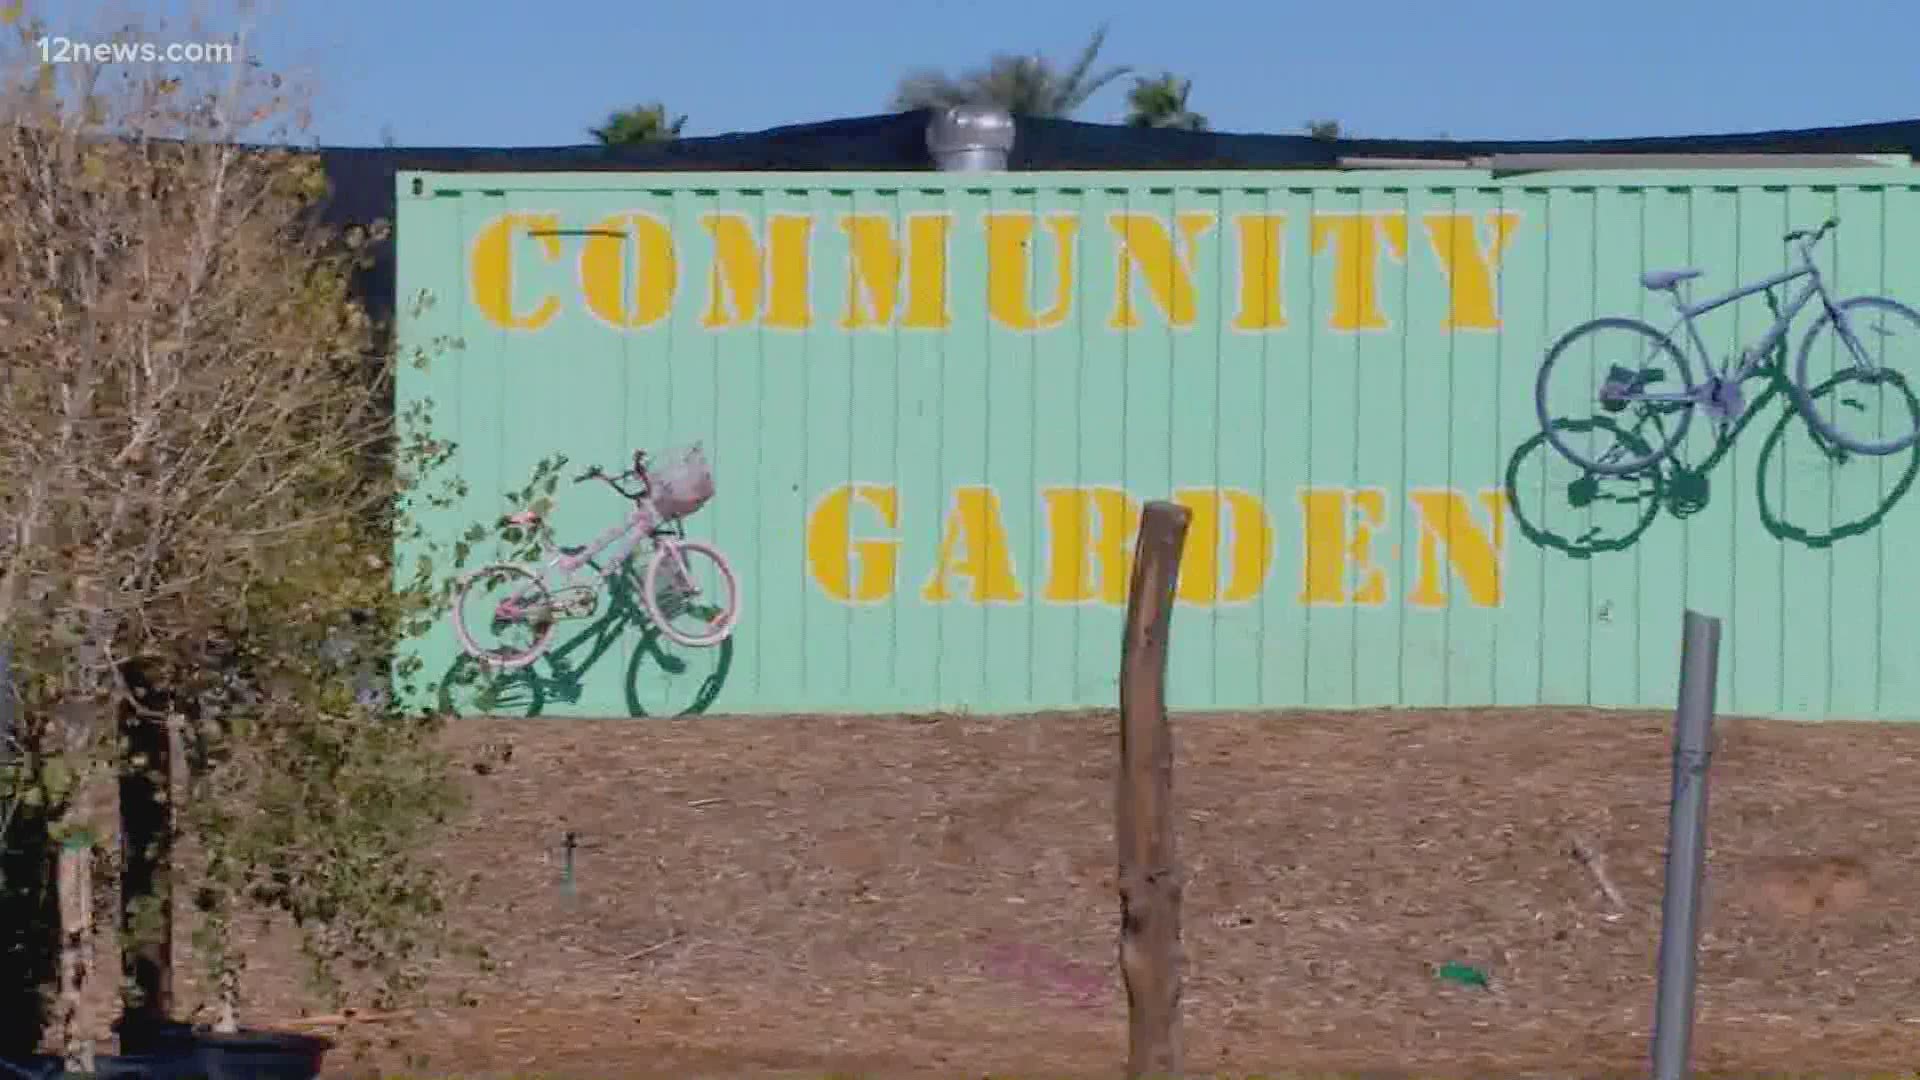 A central Phoenix community garden, Agave Farms, was vandalized over the weekend. Kindhearted volunteers have responded to help the garden bounce back.